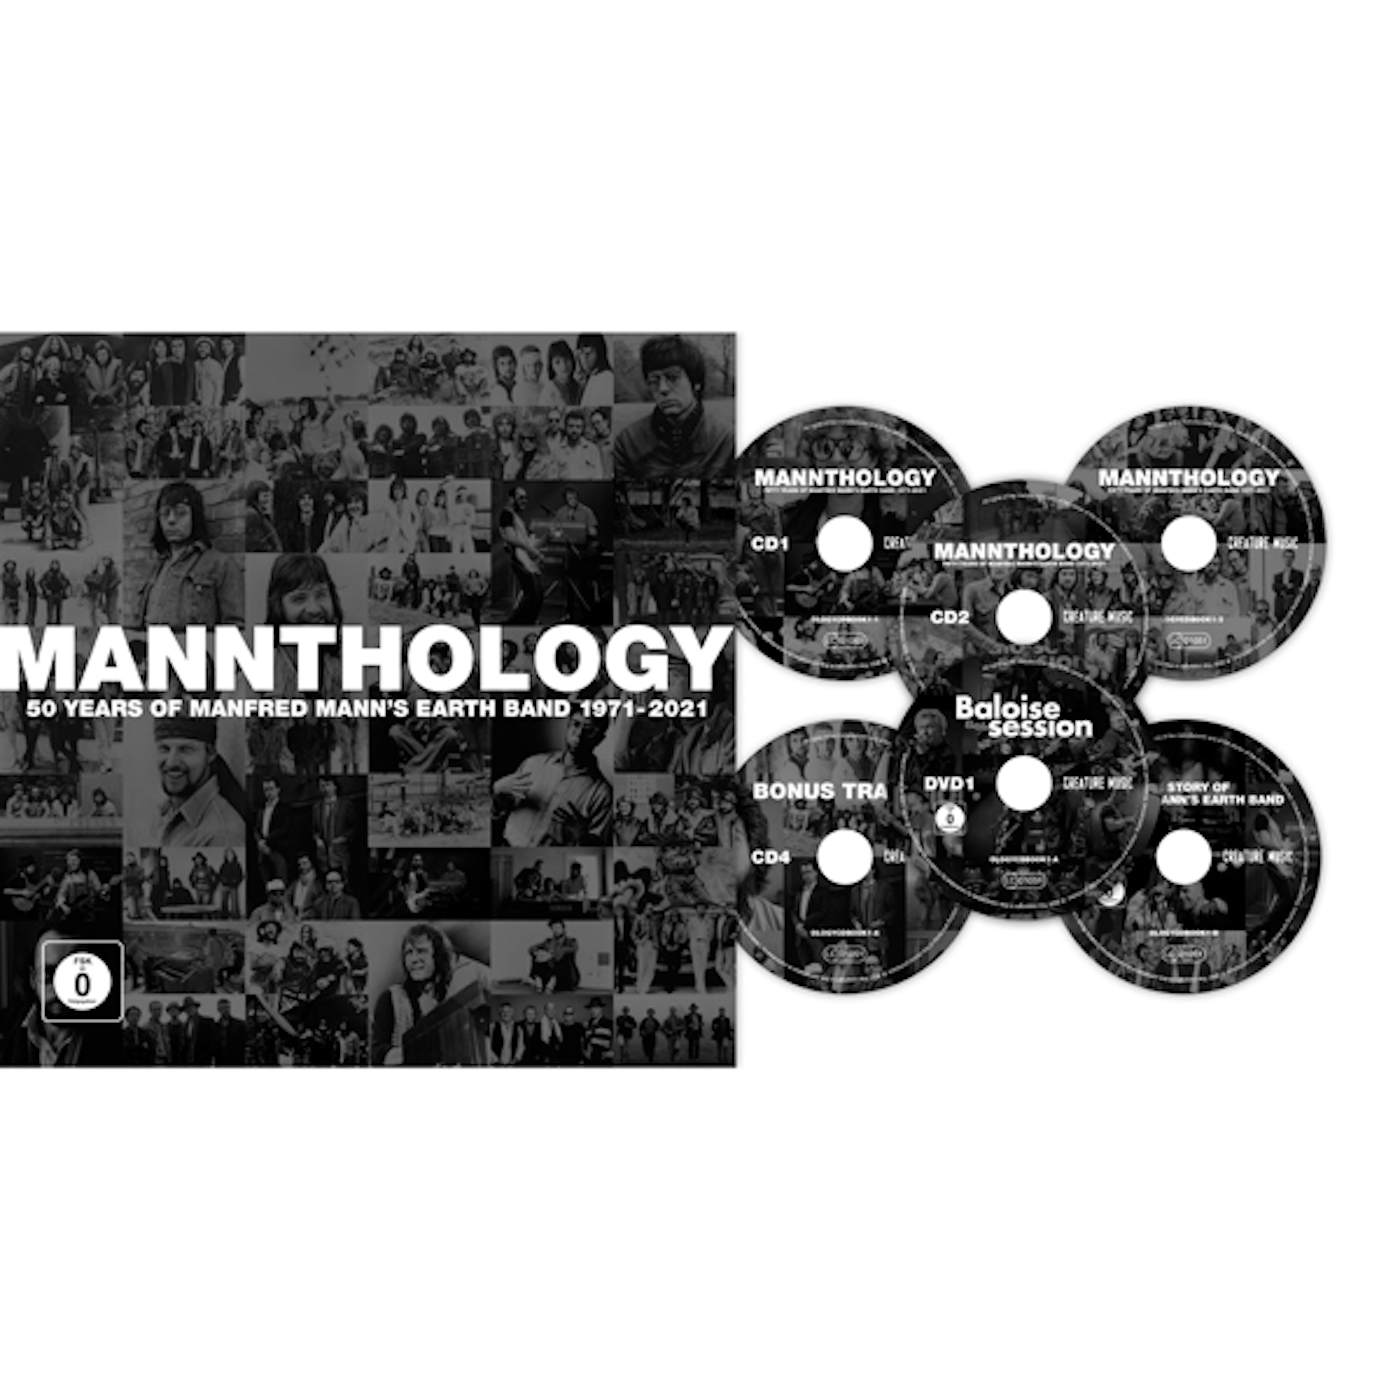 Manfred Mann's Earth Band MANNTHOLOGY (DELUXE/4CD/2DVD/BOOK) CD